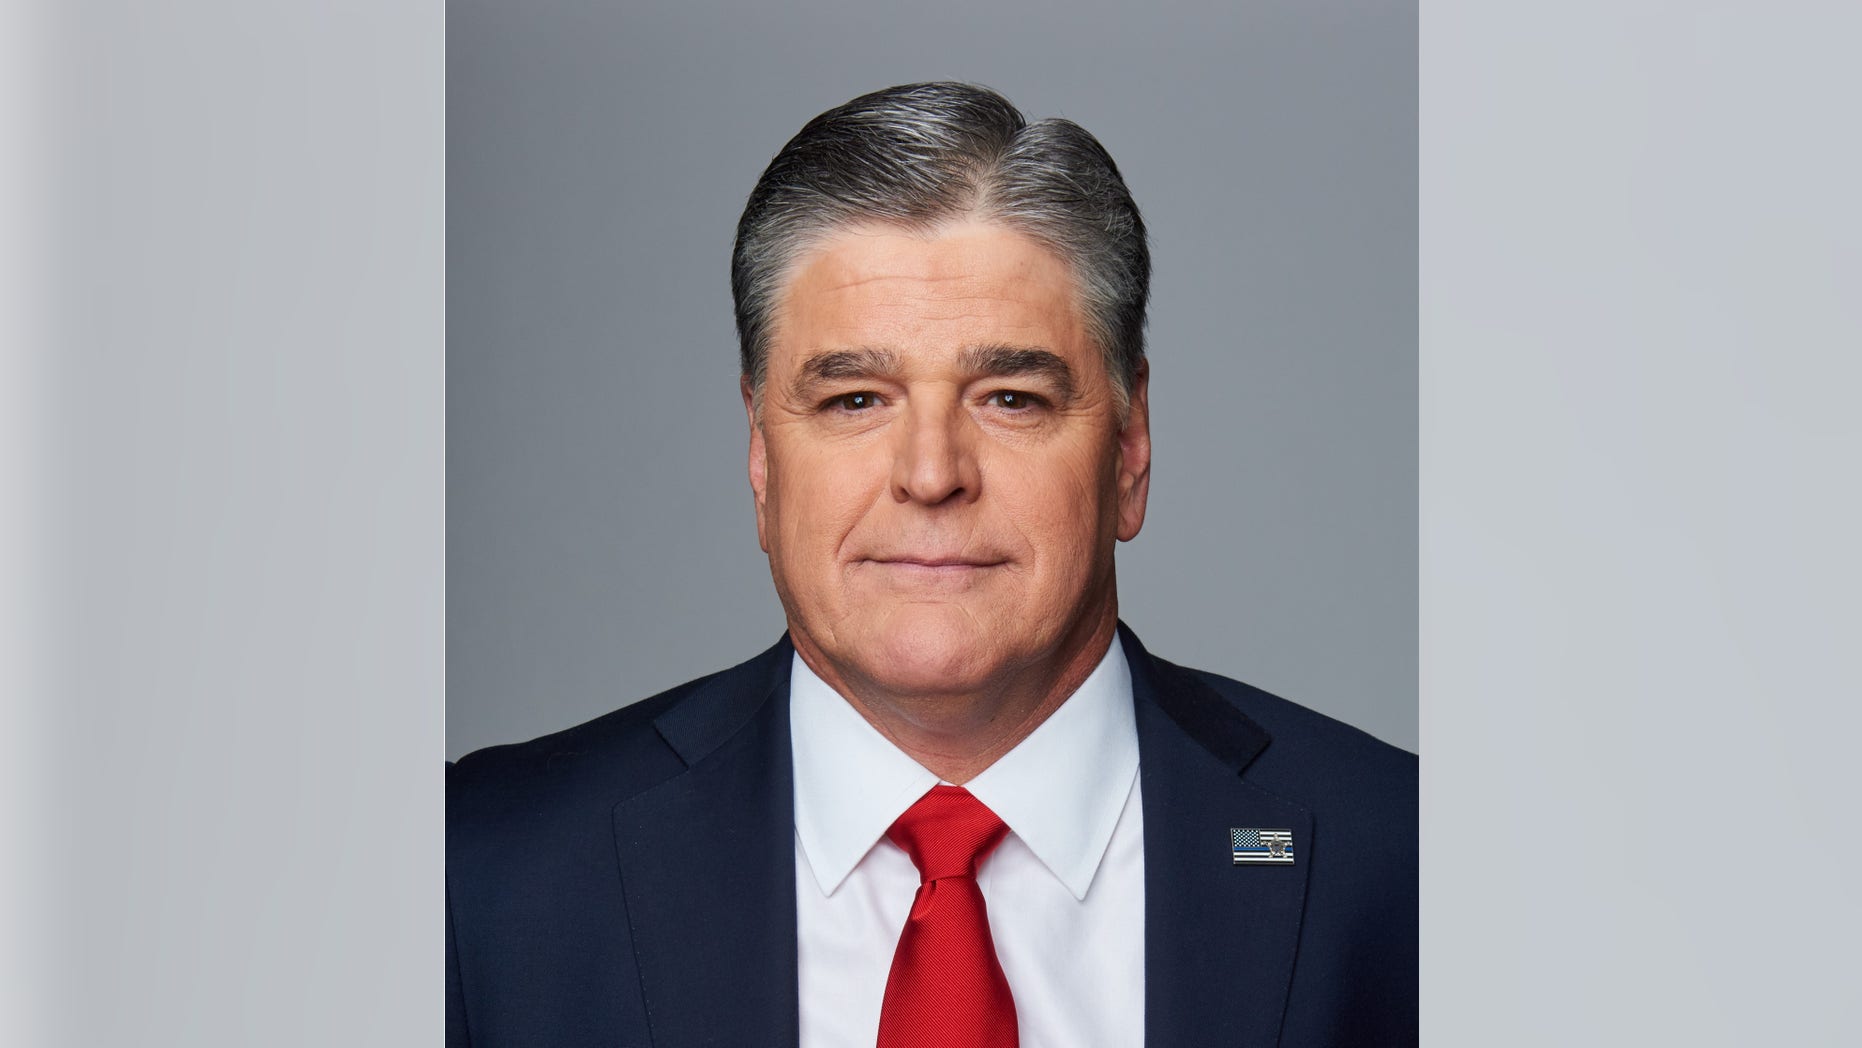 Fox News finishes 2018 as most-watched cable network as ‘Hannity’ dominates